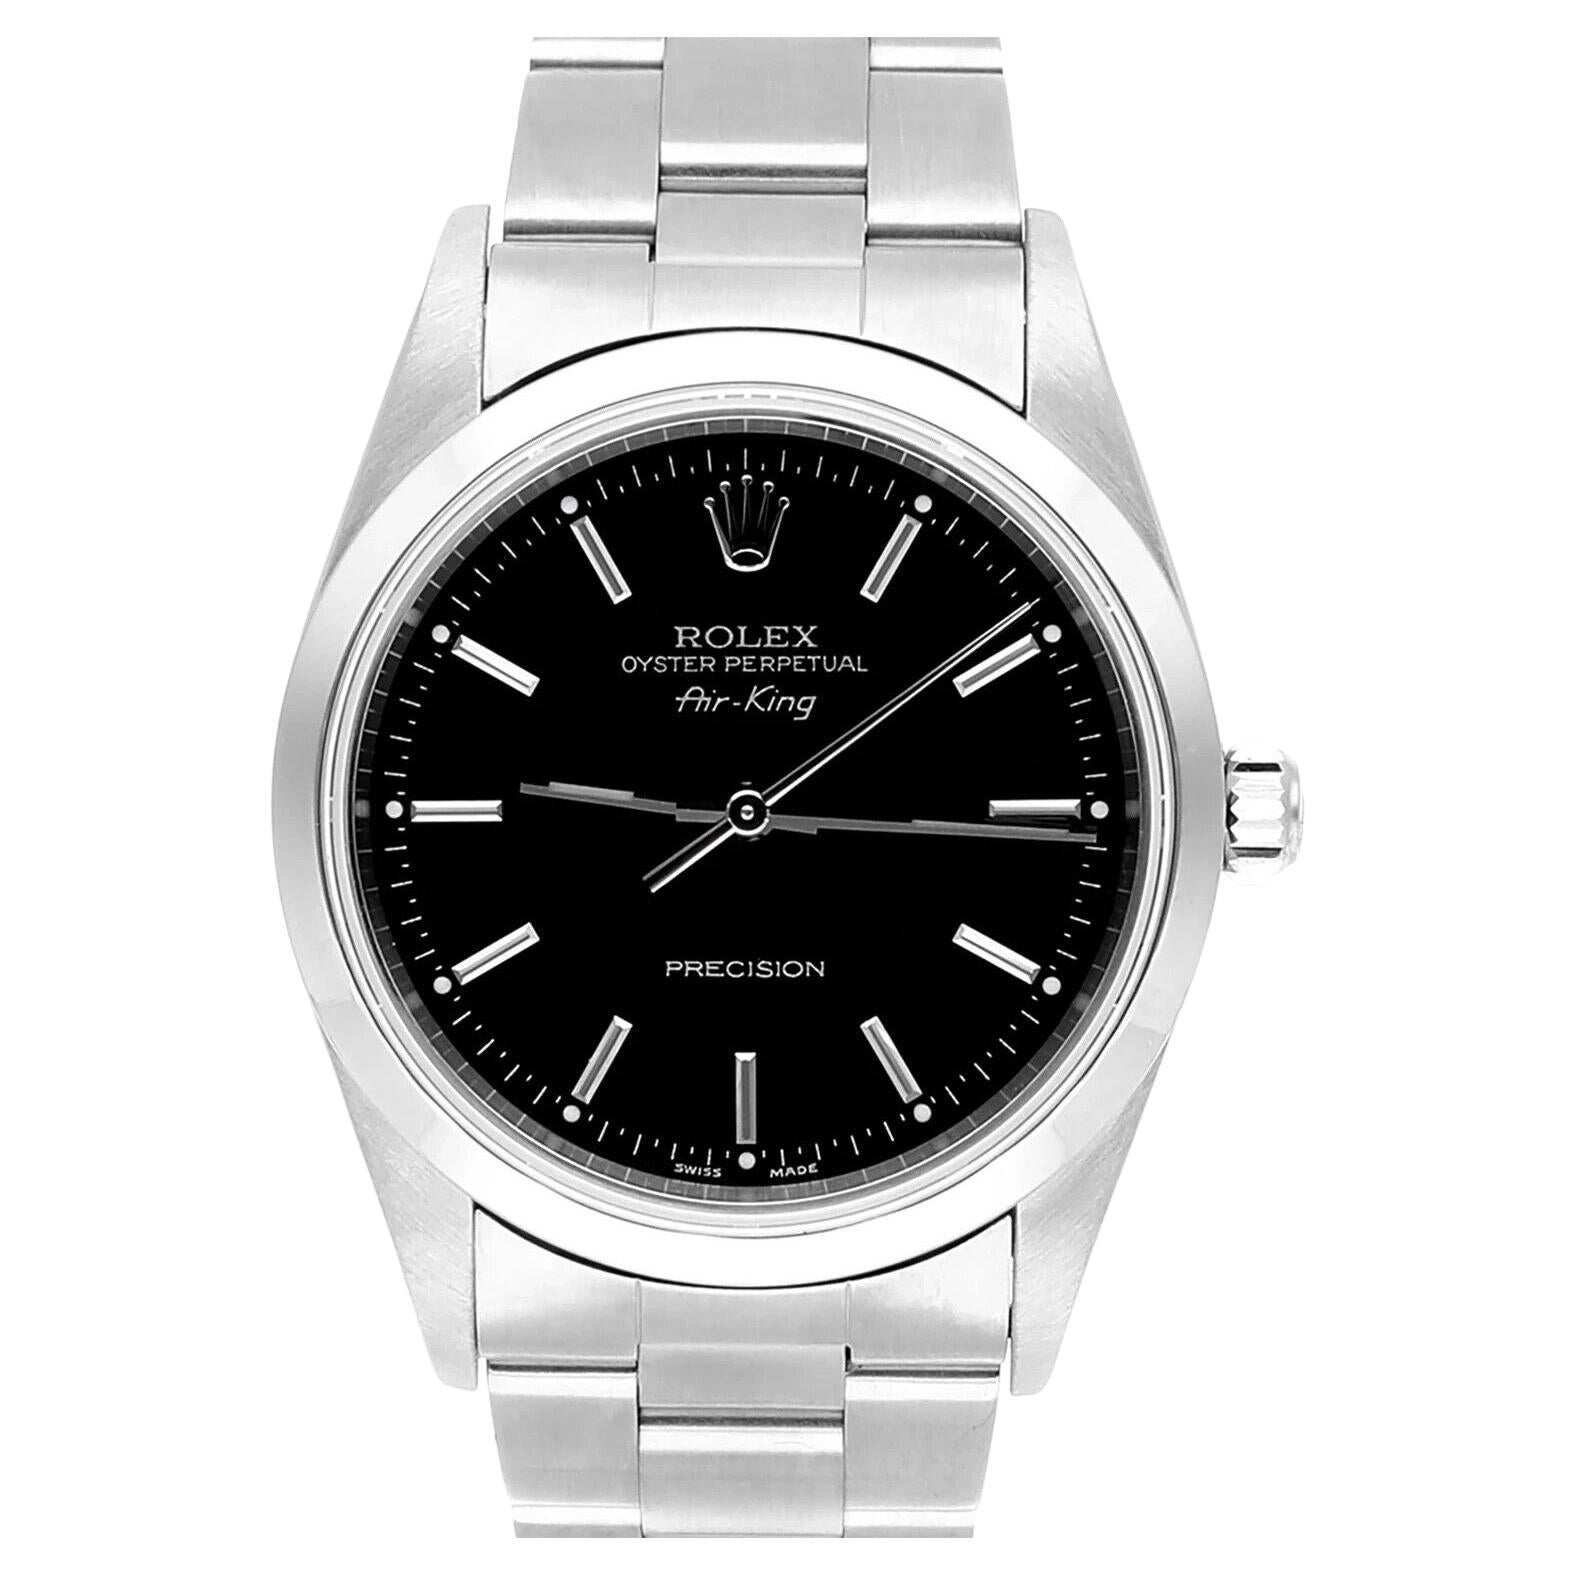 Montre Rolex Oyster Perpetual Air-King 34mm Black Stainless Steel Oyster 14000 en vente